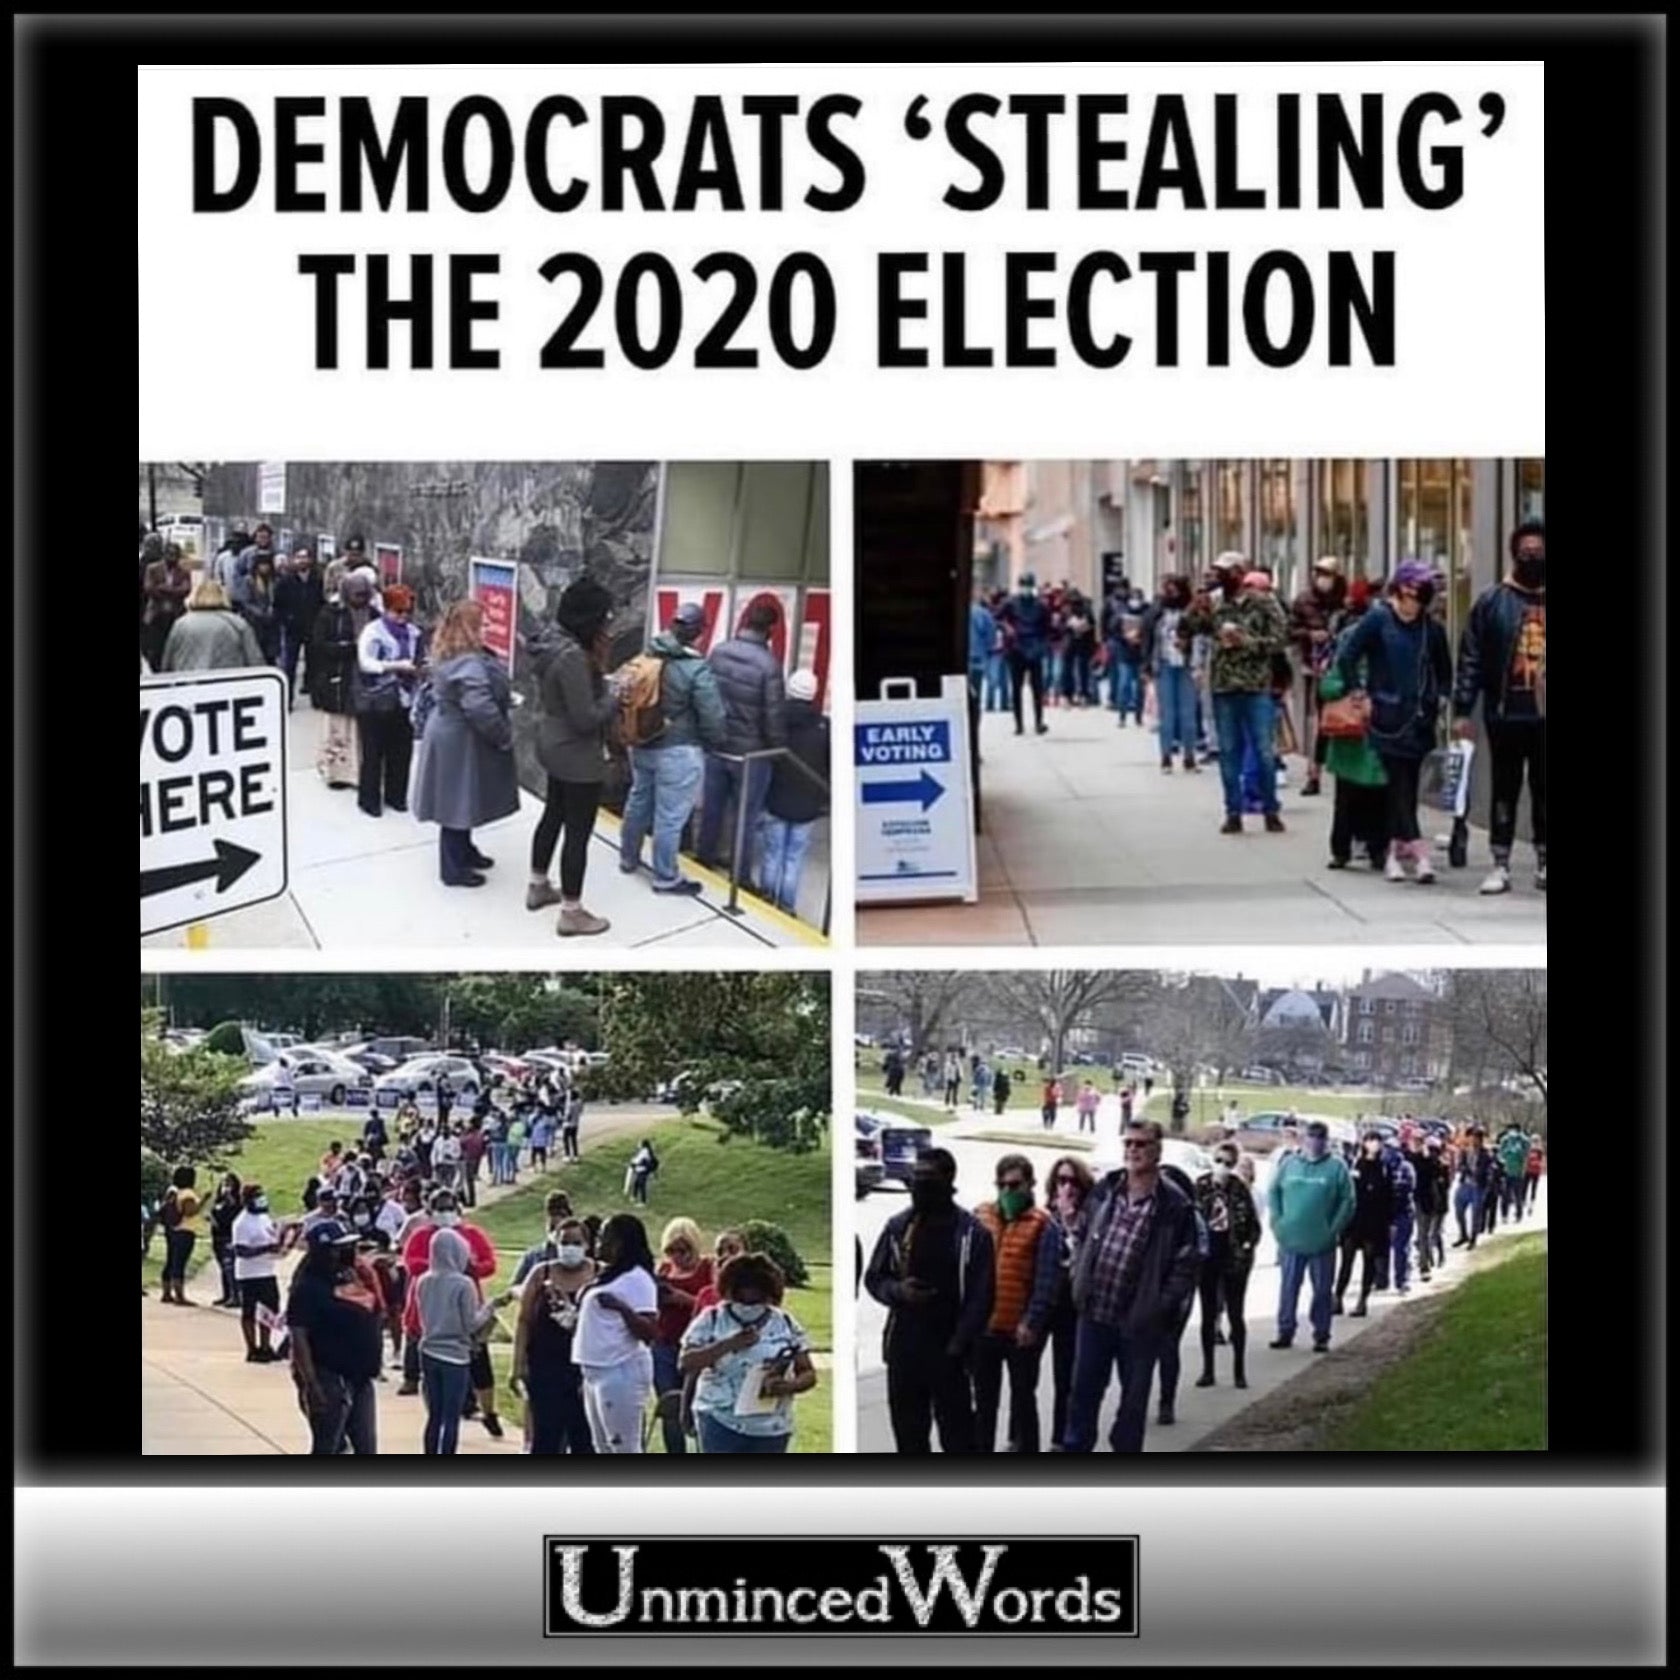 Images of Democrats “Stealing” the 2020 Election